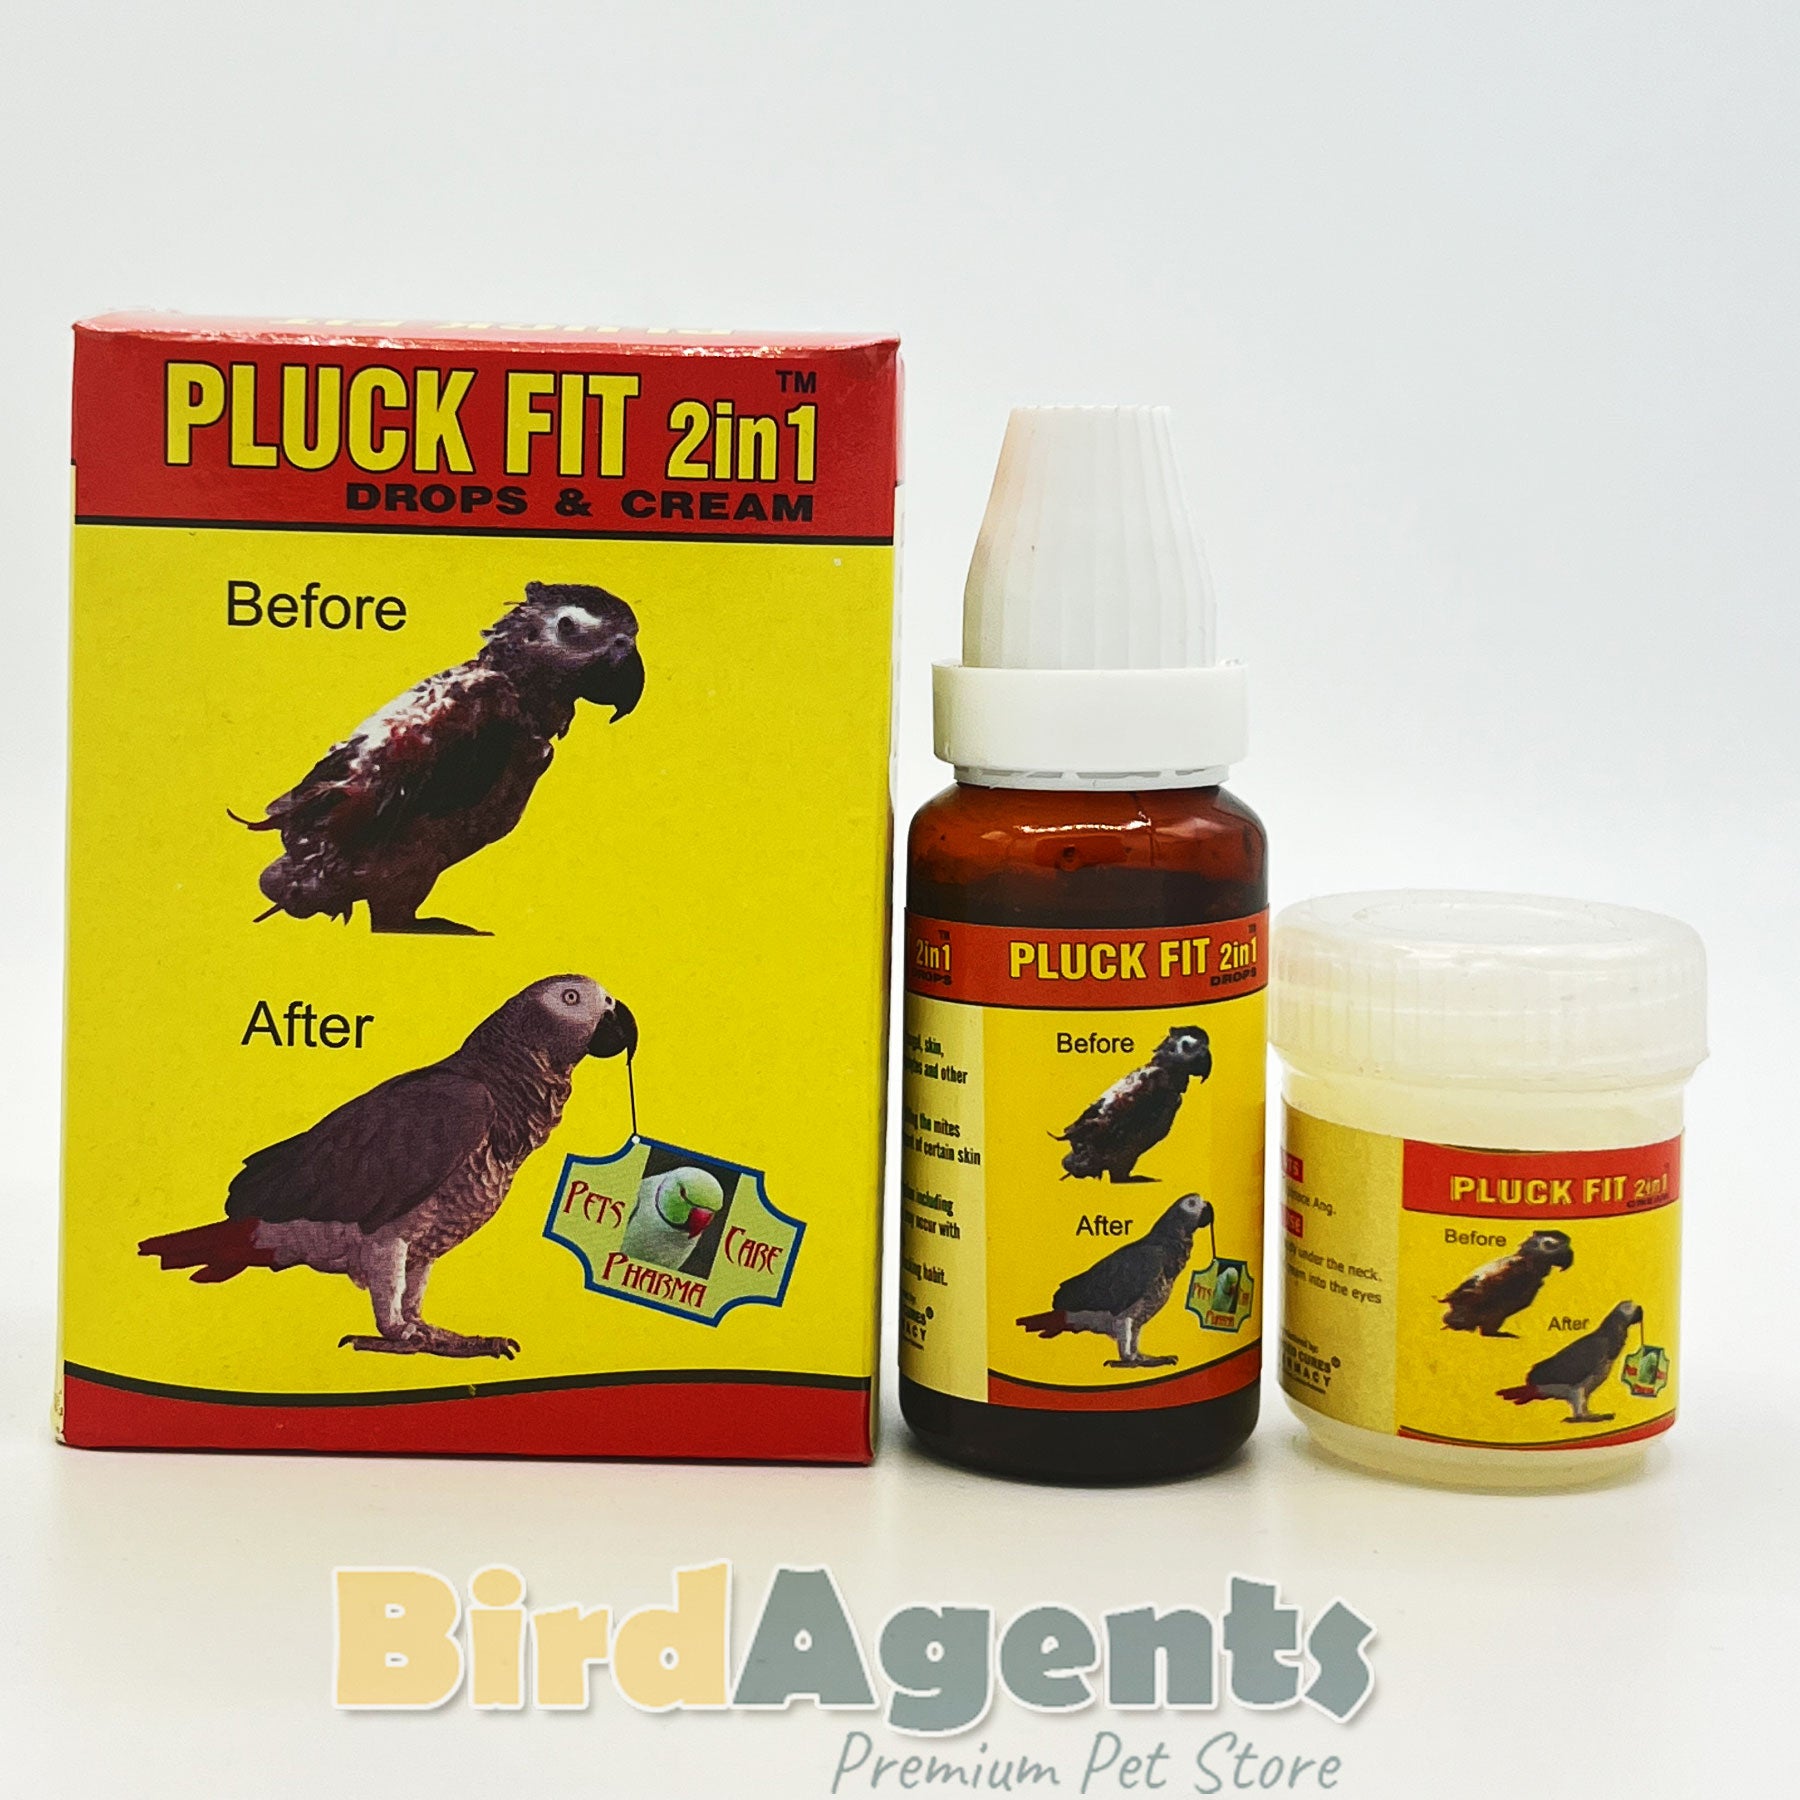 Pluck Fit 2 in 1 (For Feathers Plucking) –